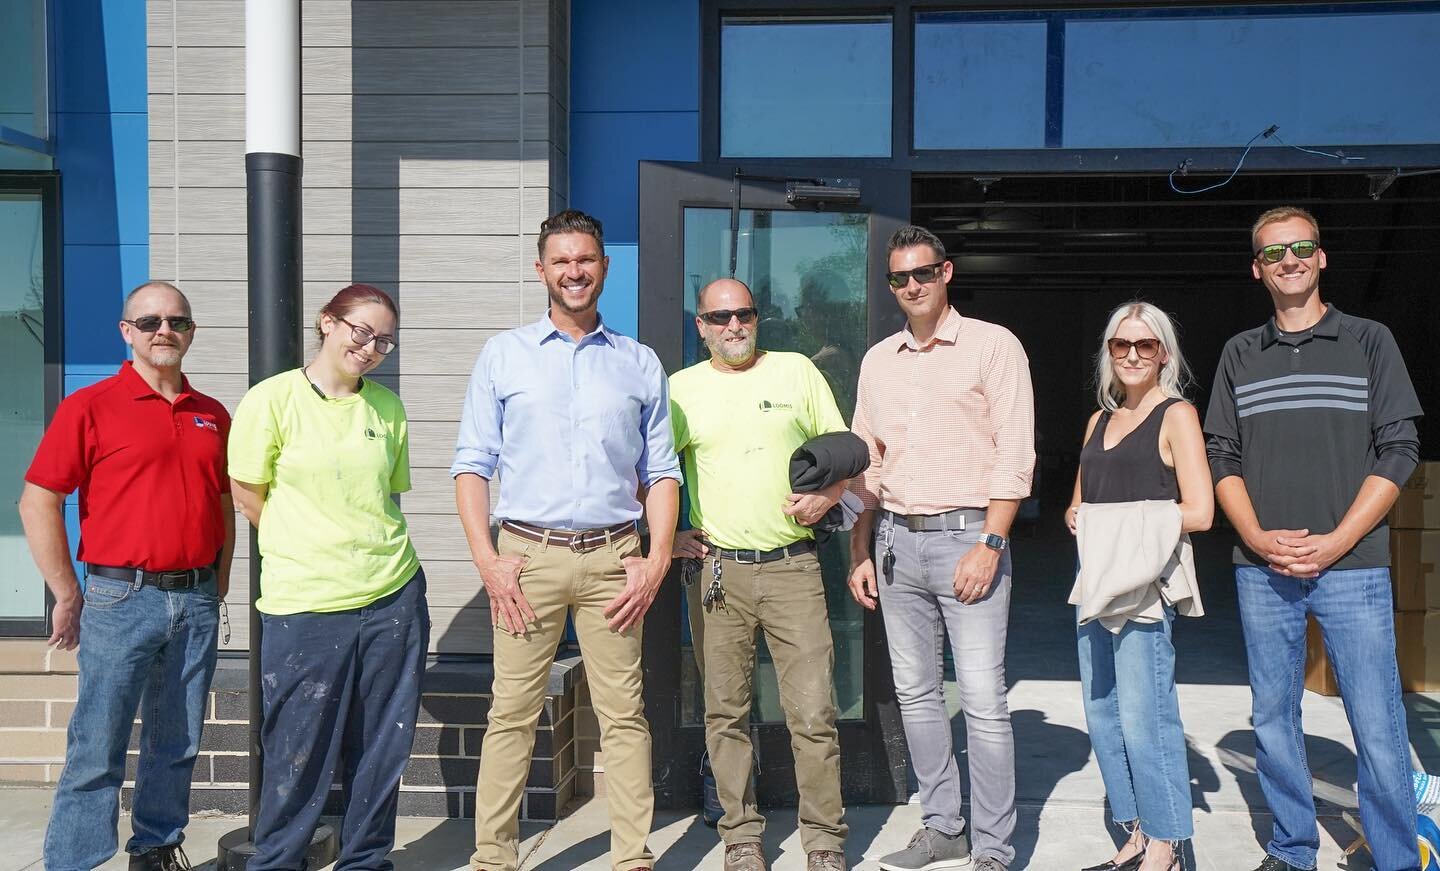 What a beautiful day to visit some of our job sites! We have such an amazing team of people to help our projects run smoothly and gain the trust of not only the client, but the community in which we build in. It is always great to go back and look at